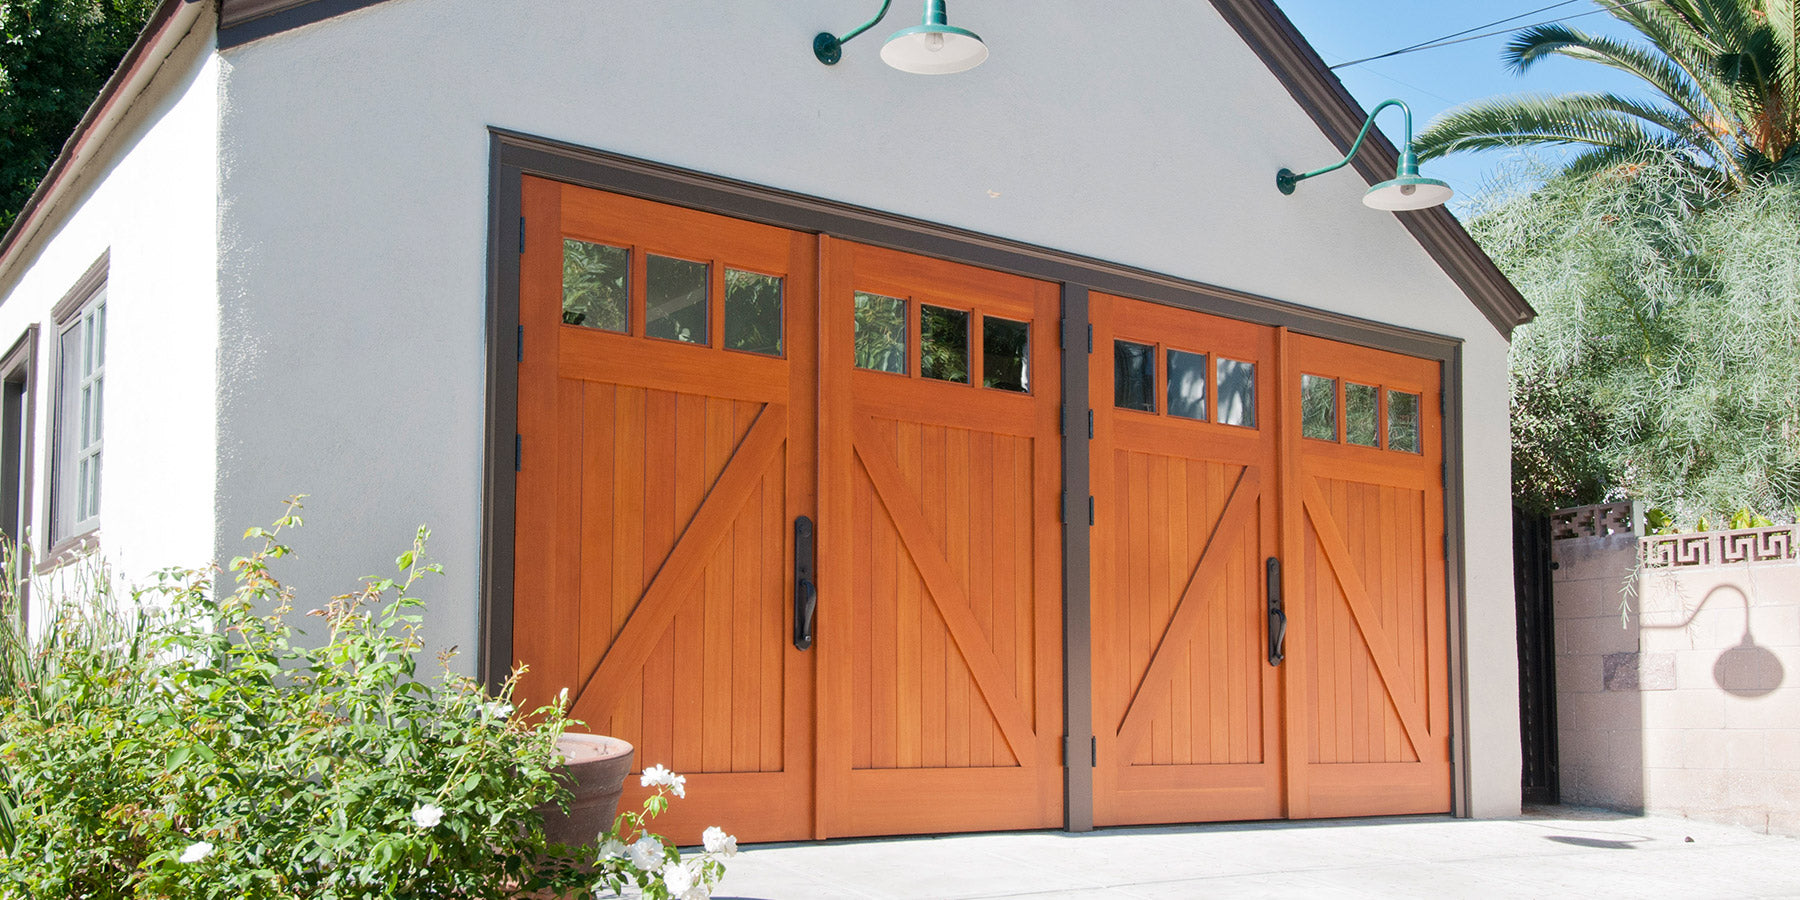 Pictures highlights a two sets of Z-Brace Carriage doors on a garage entrance. Photo by RealCraft.